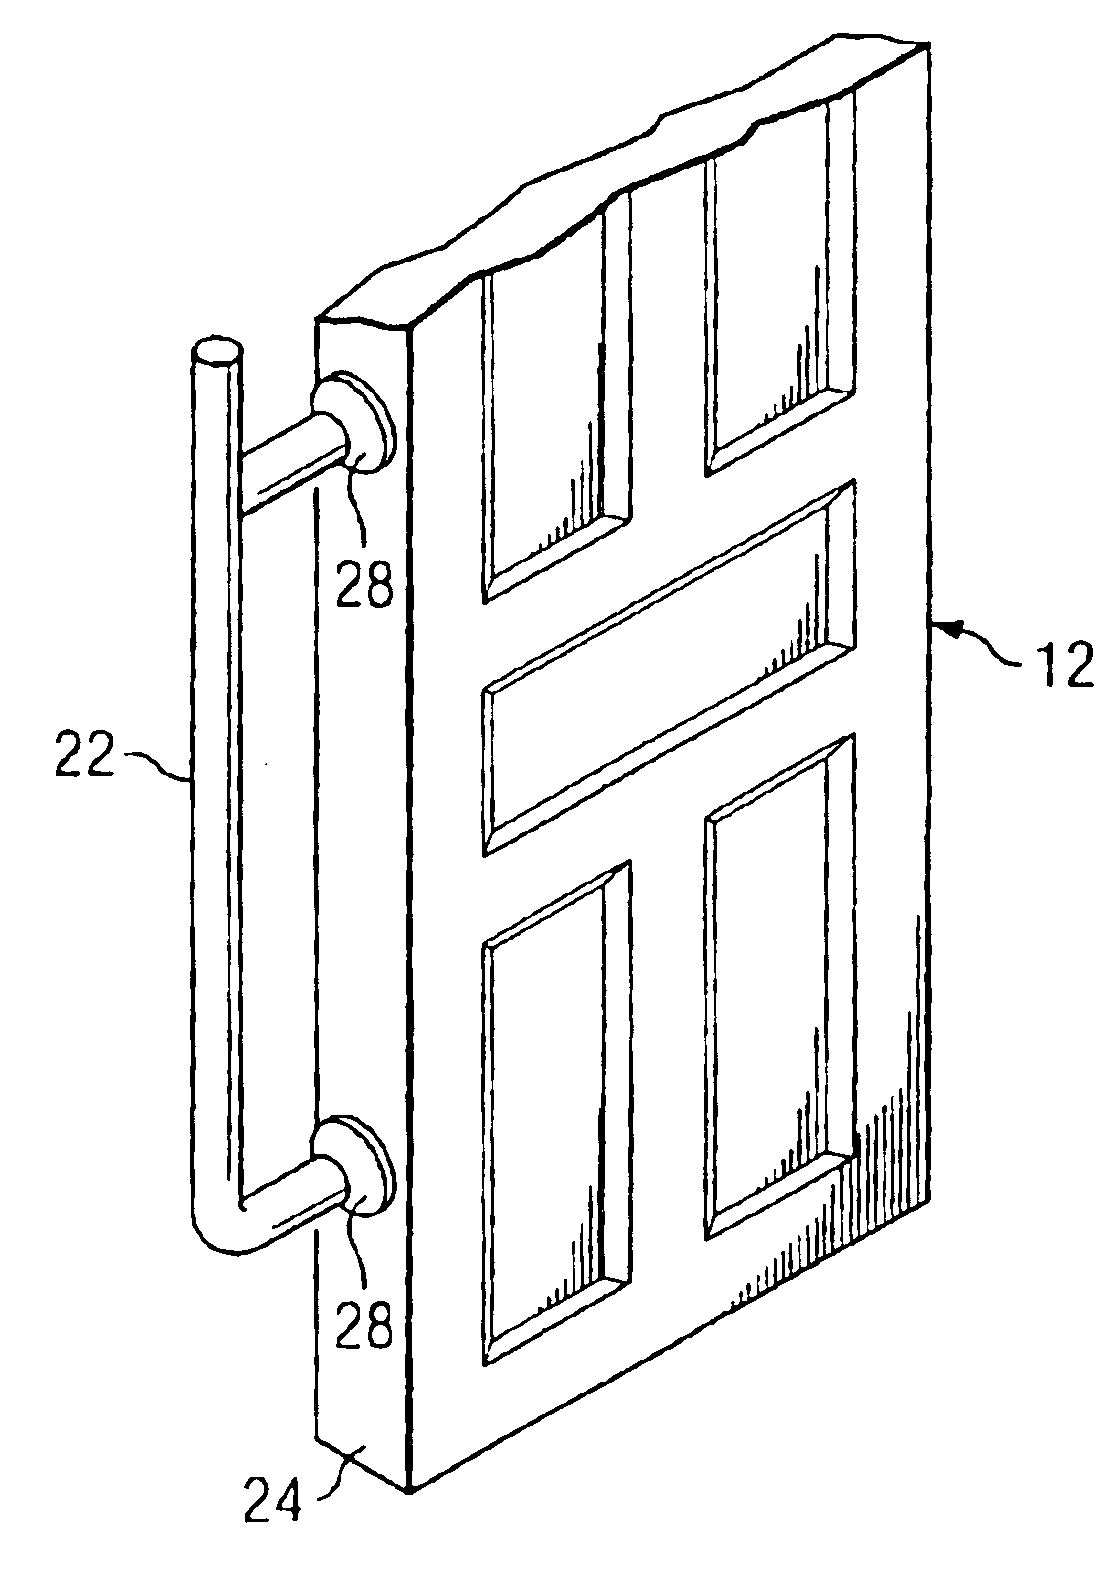 Method and system for powder coating passage doors